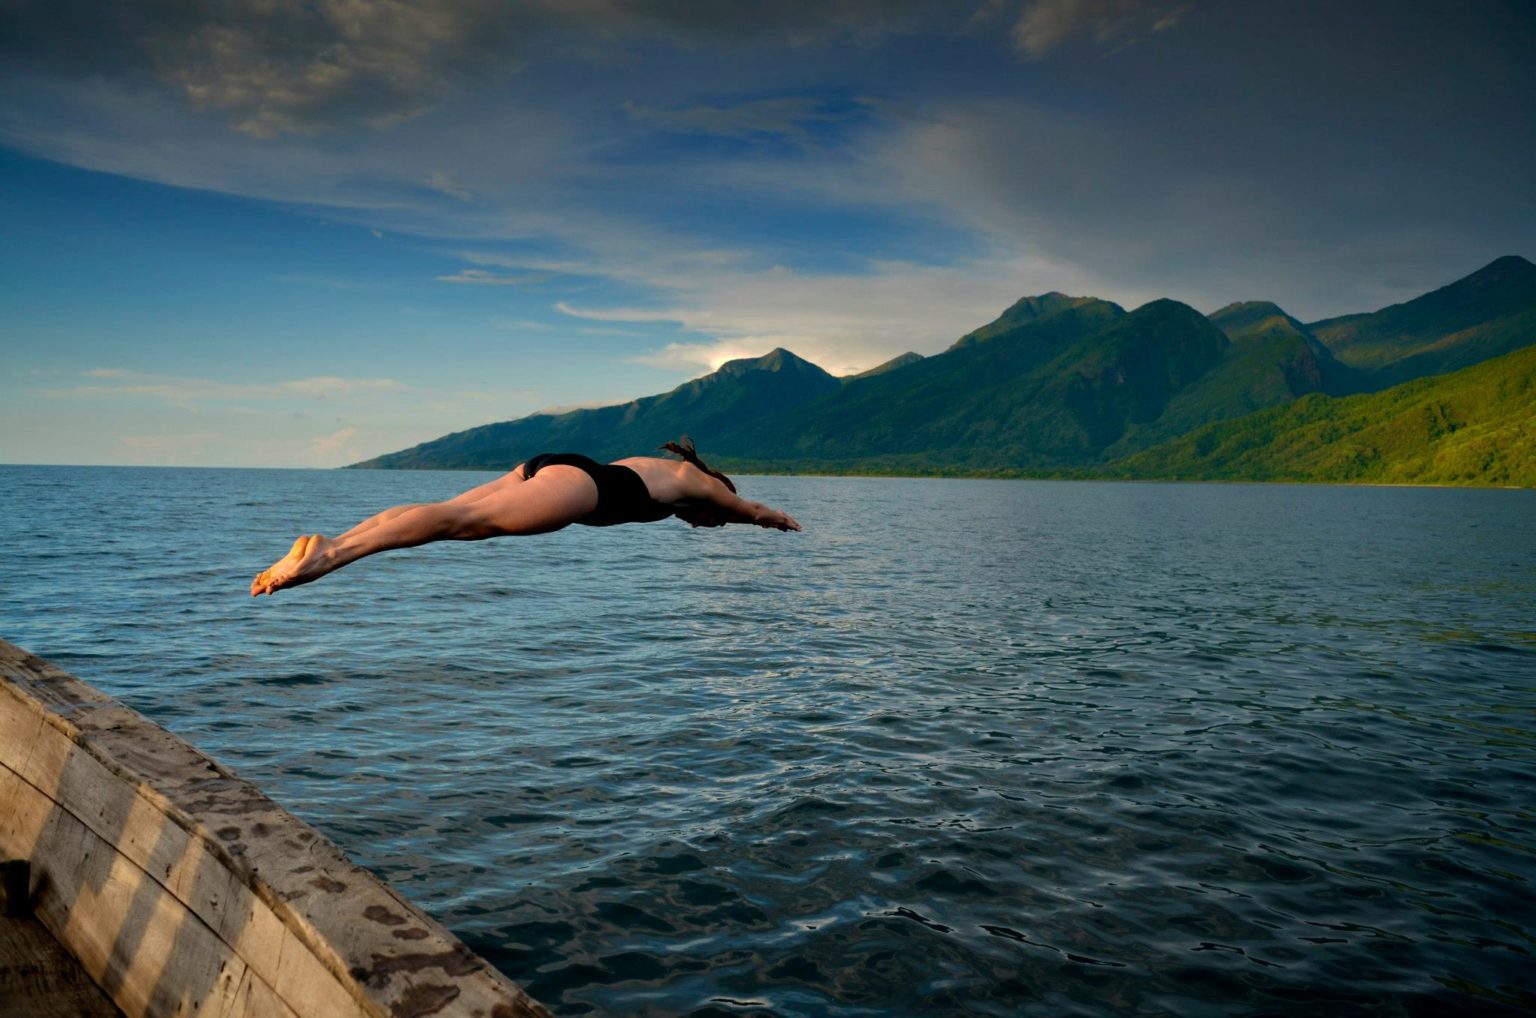 Kim diving into Lake Tanganyika with the Mahale Mountains in the background